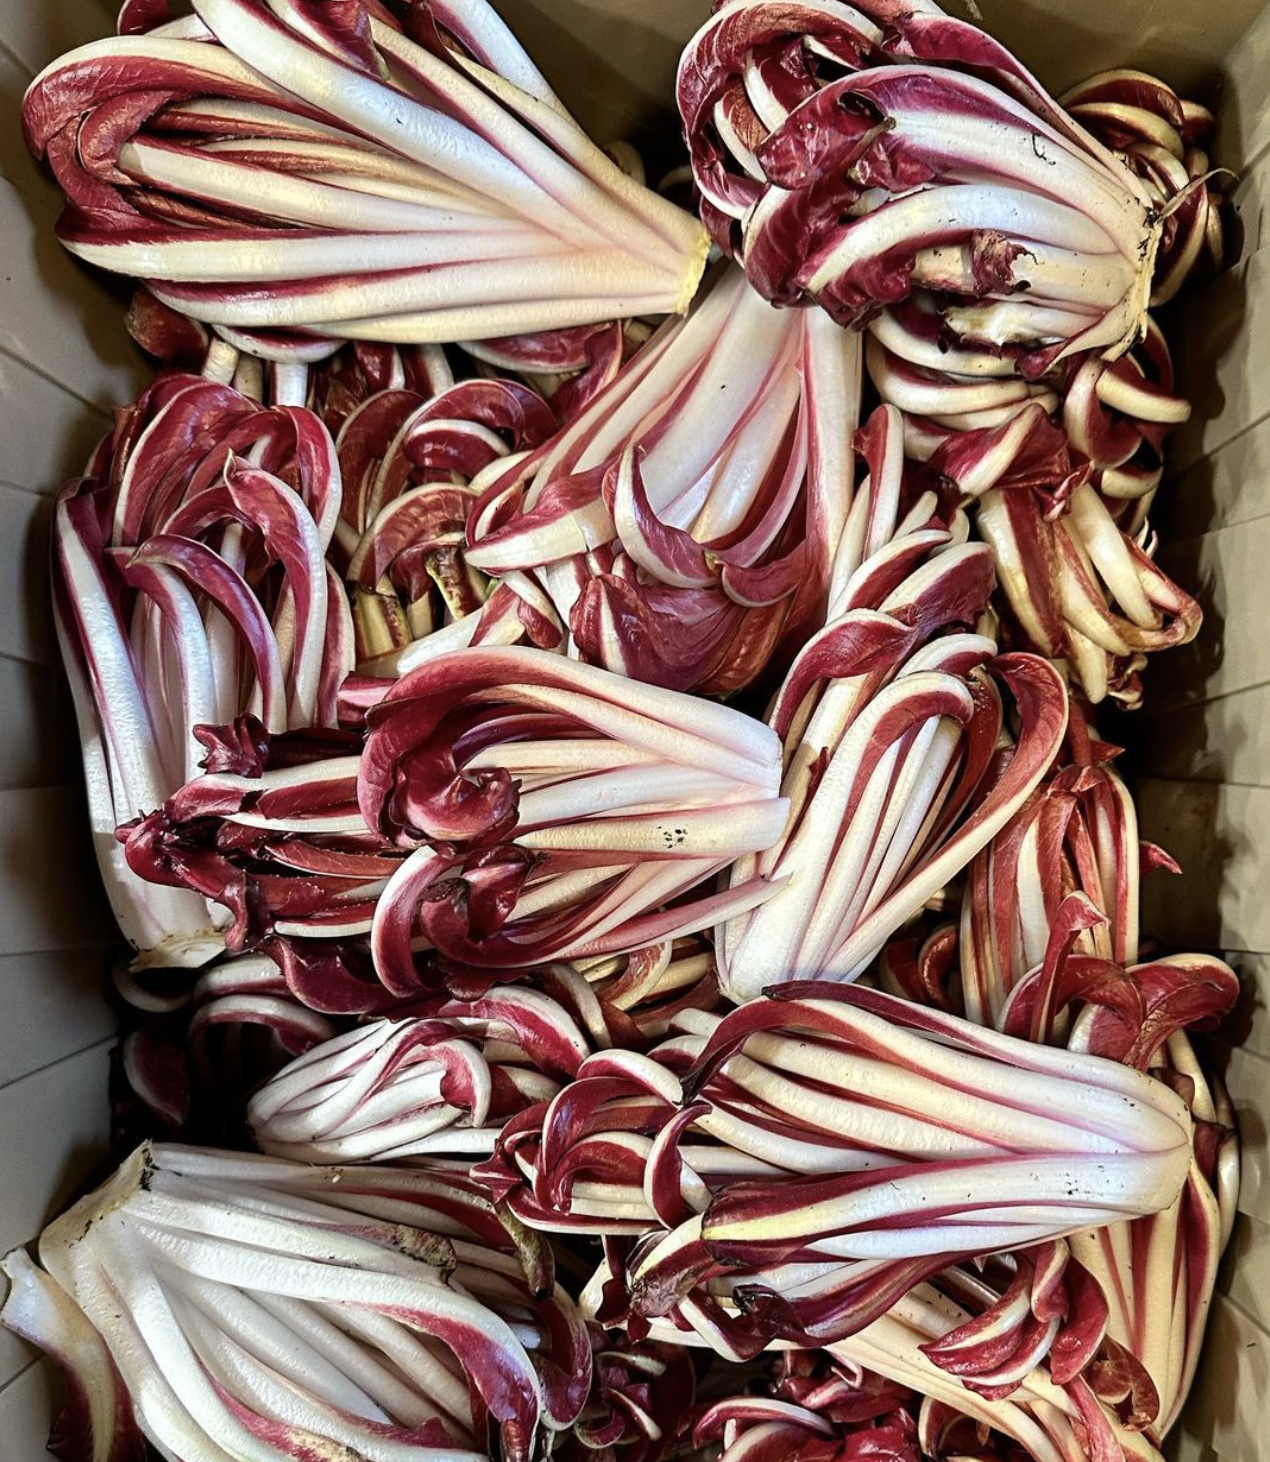 We harvested our first Tardivo di Treviso radicchio.